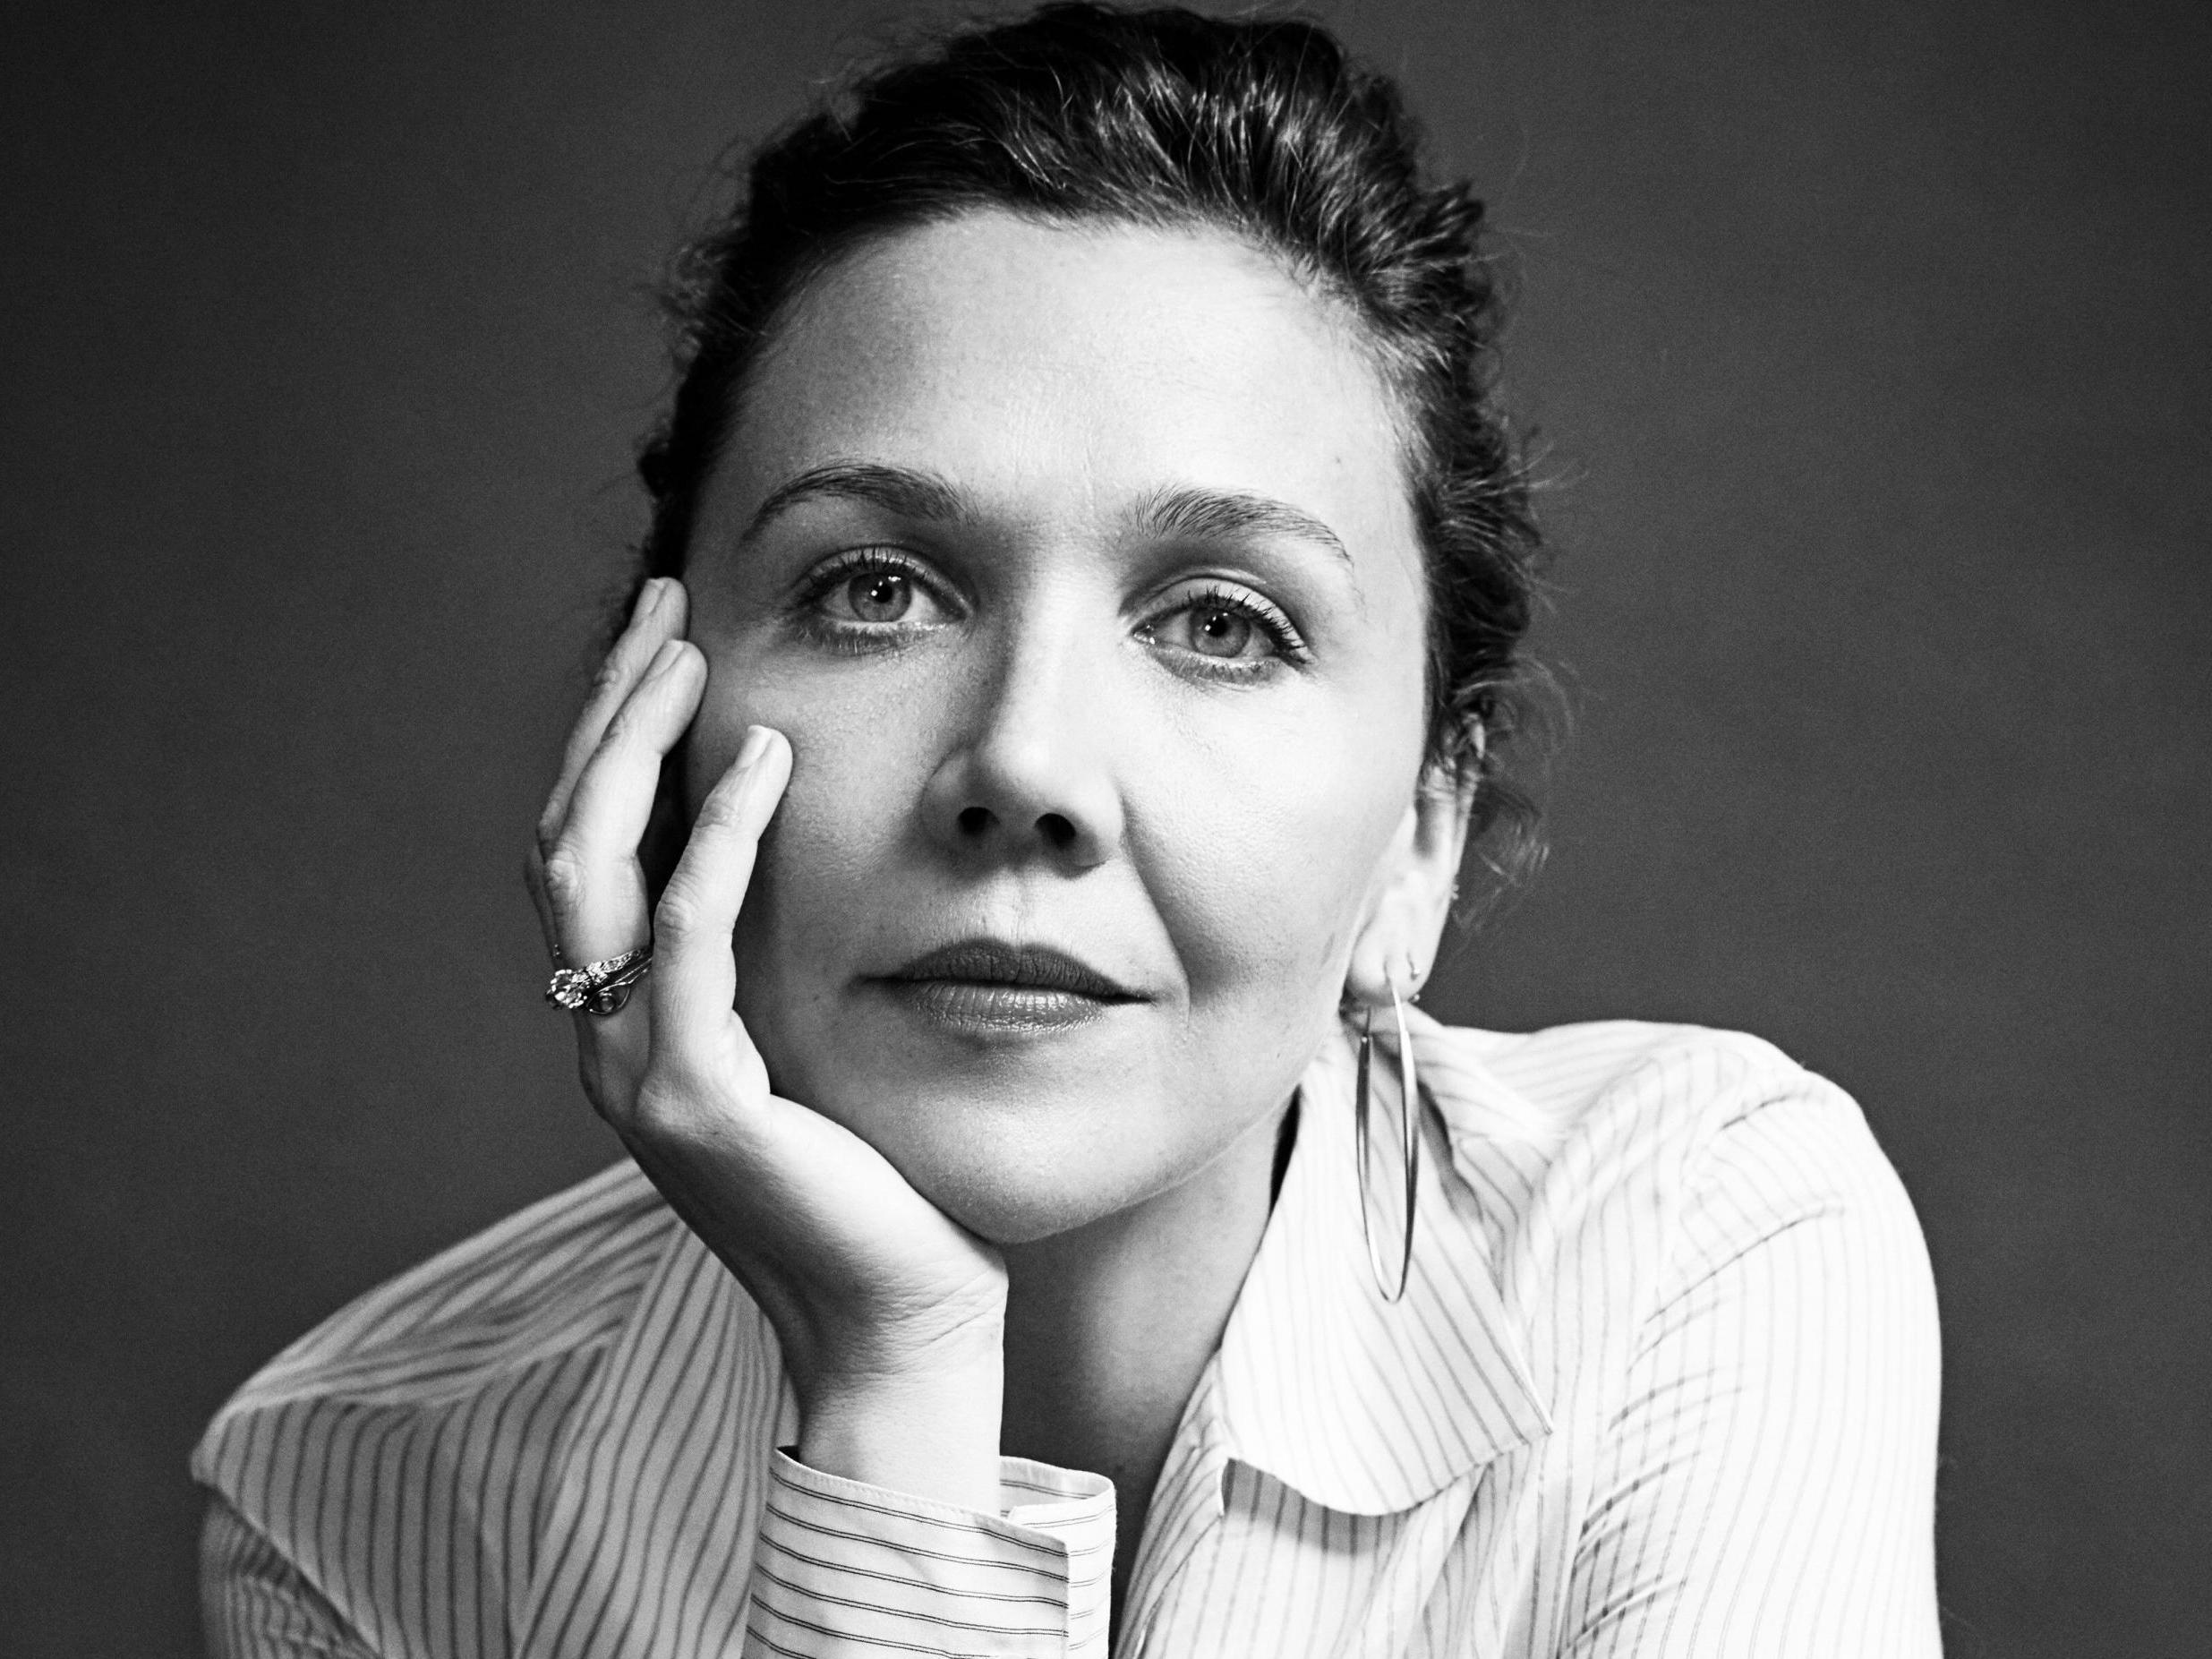 Maggie Gyllenhaal: ‘To me it felt like people were very struck by Christine Blasey Ford's lack of performance, because that isn't what we're used to seeing. It felt so truthful in a moment where I think we're really lacking truthfulness’